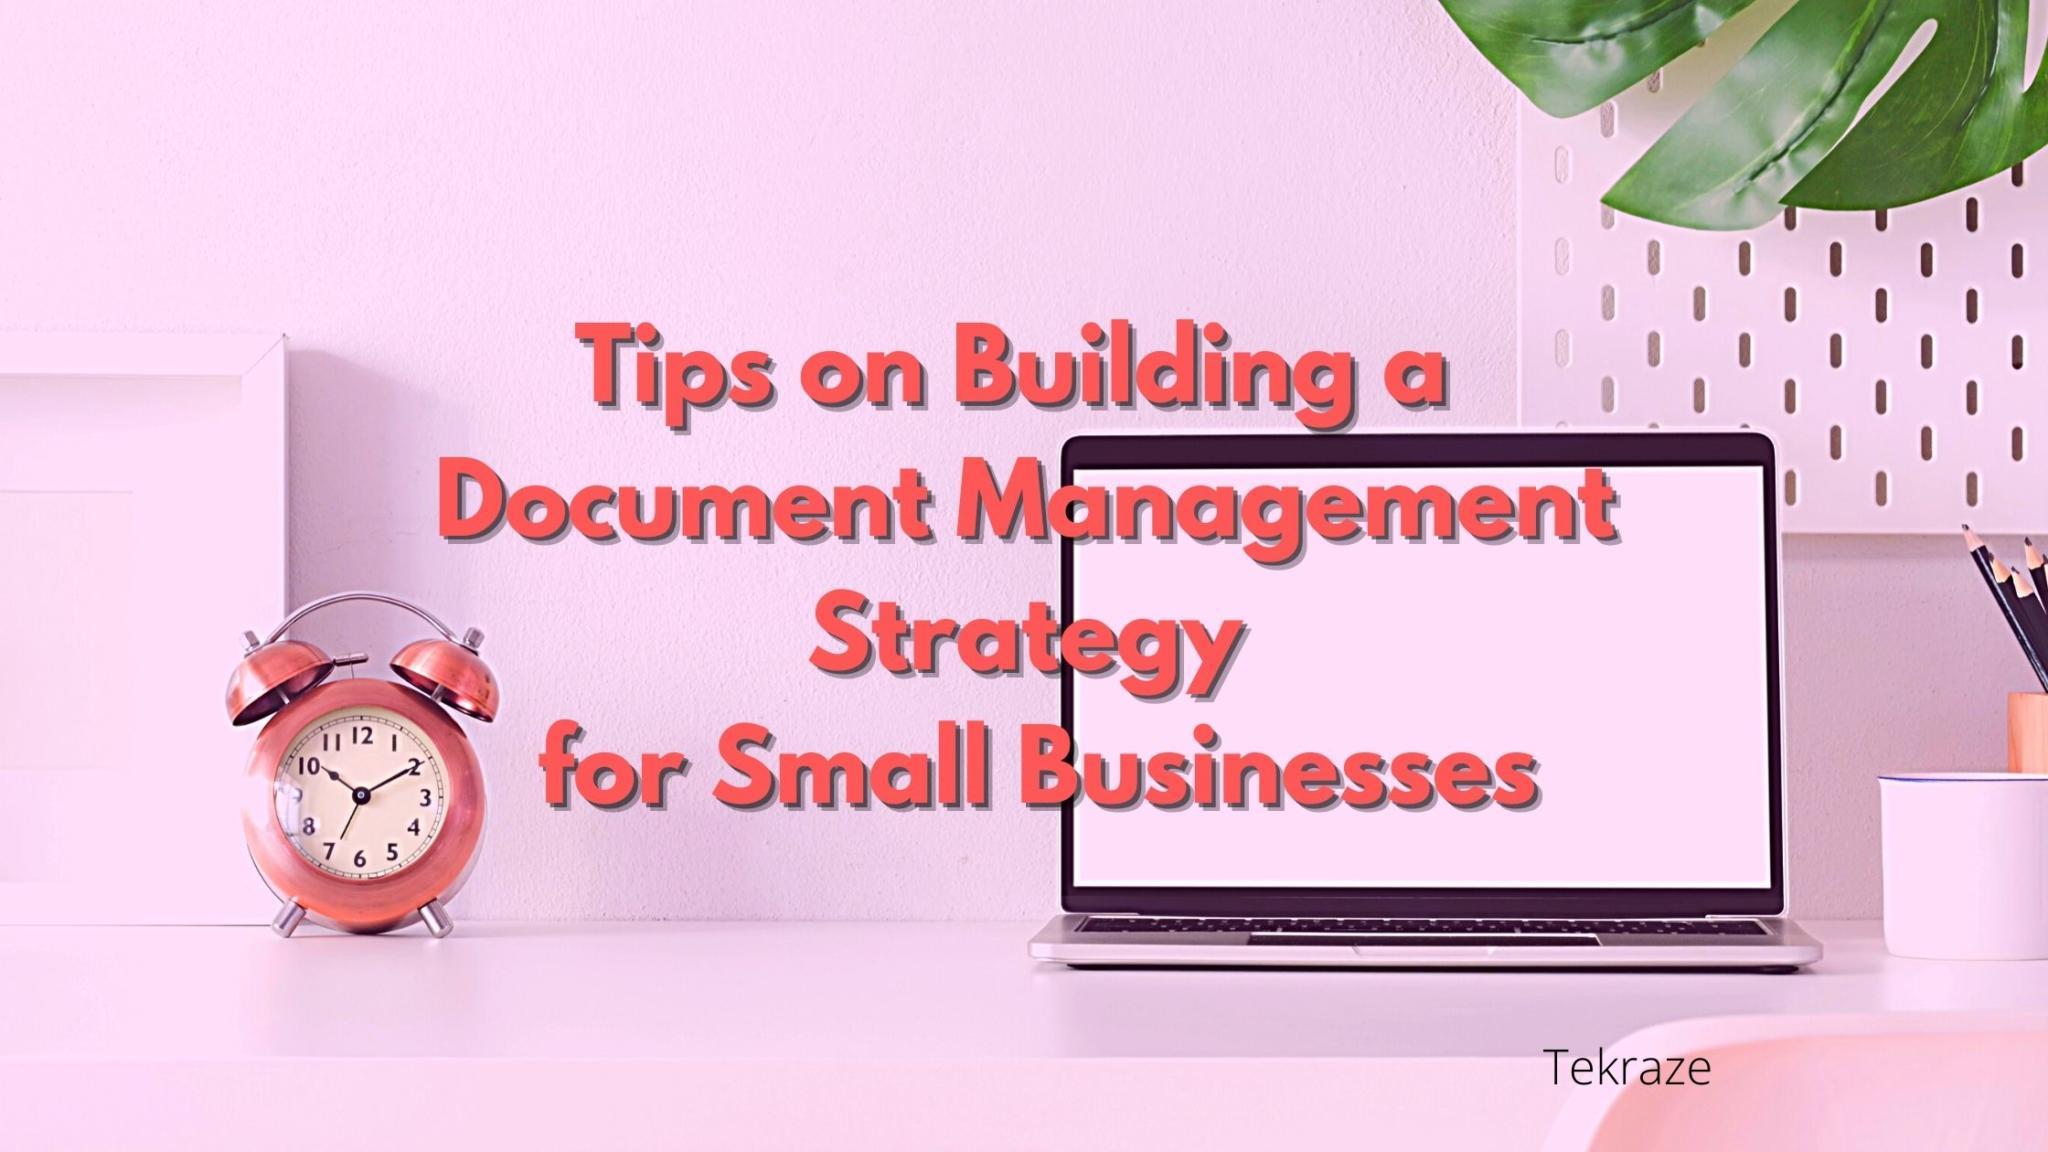 4 Tips on Building a Document Management Strategy for Small Businesses